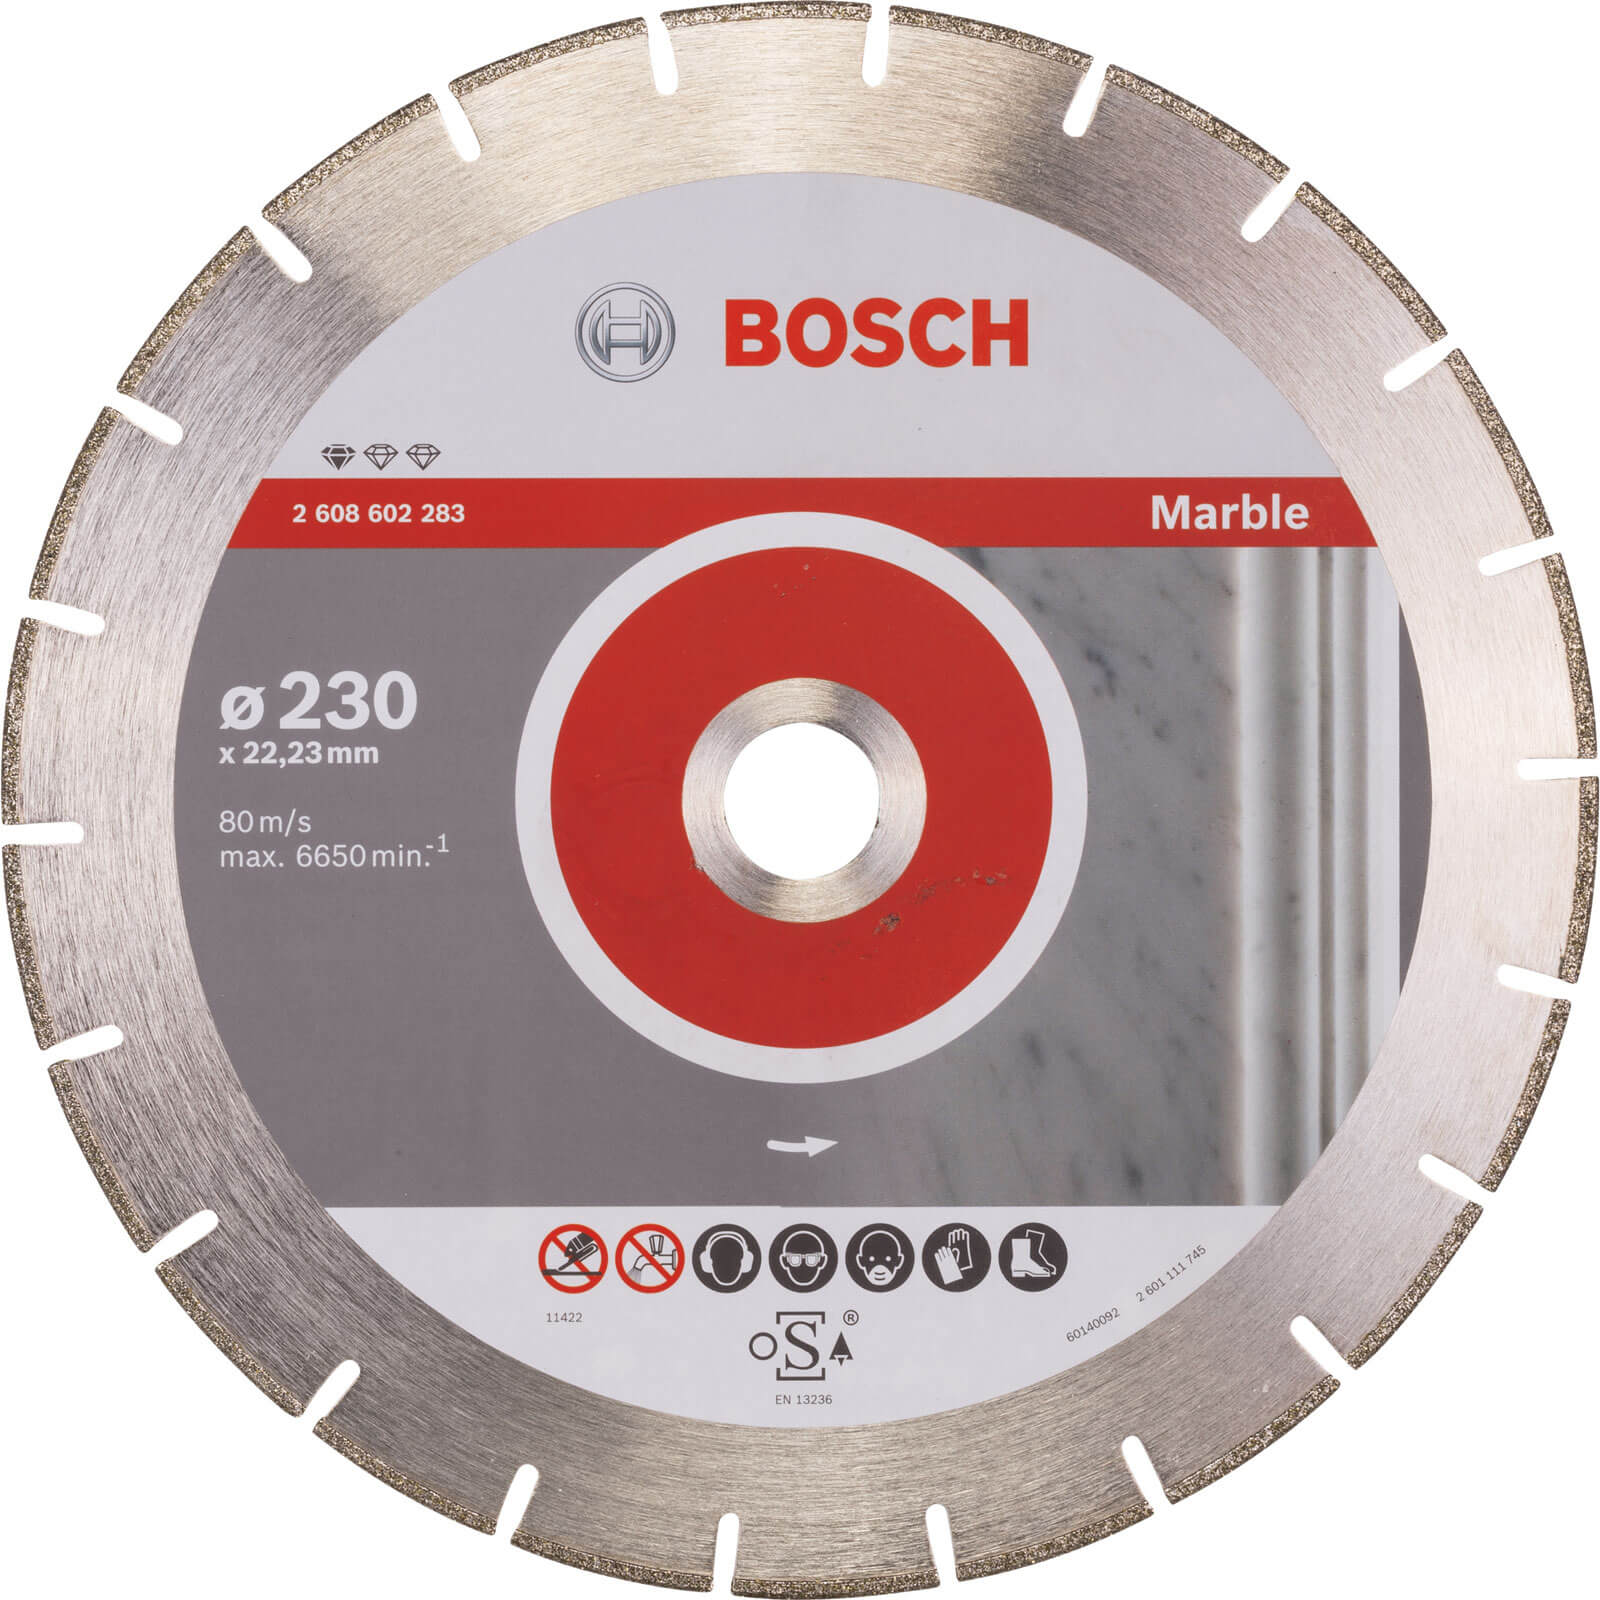 Photo of Bosch Diamond Disc For Marble 230mm